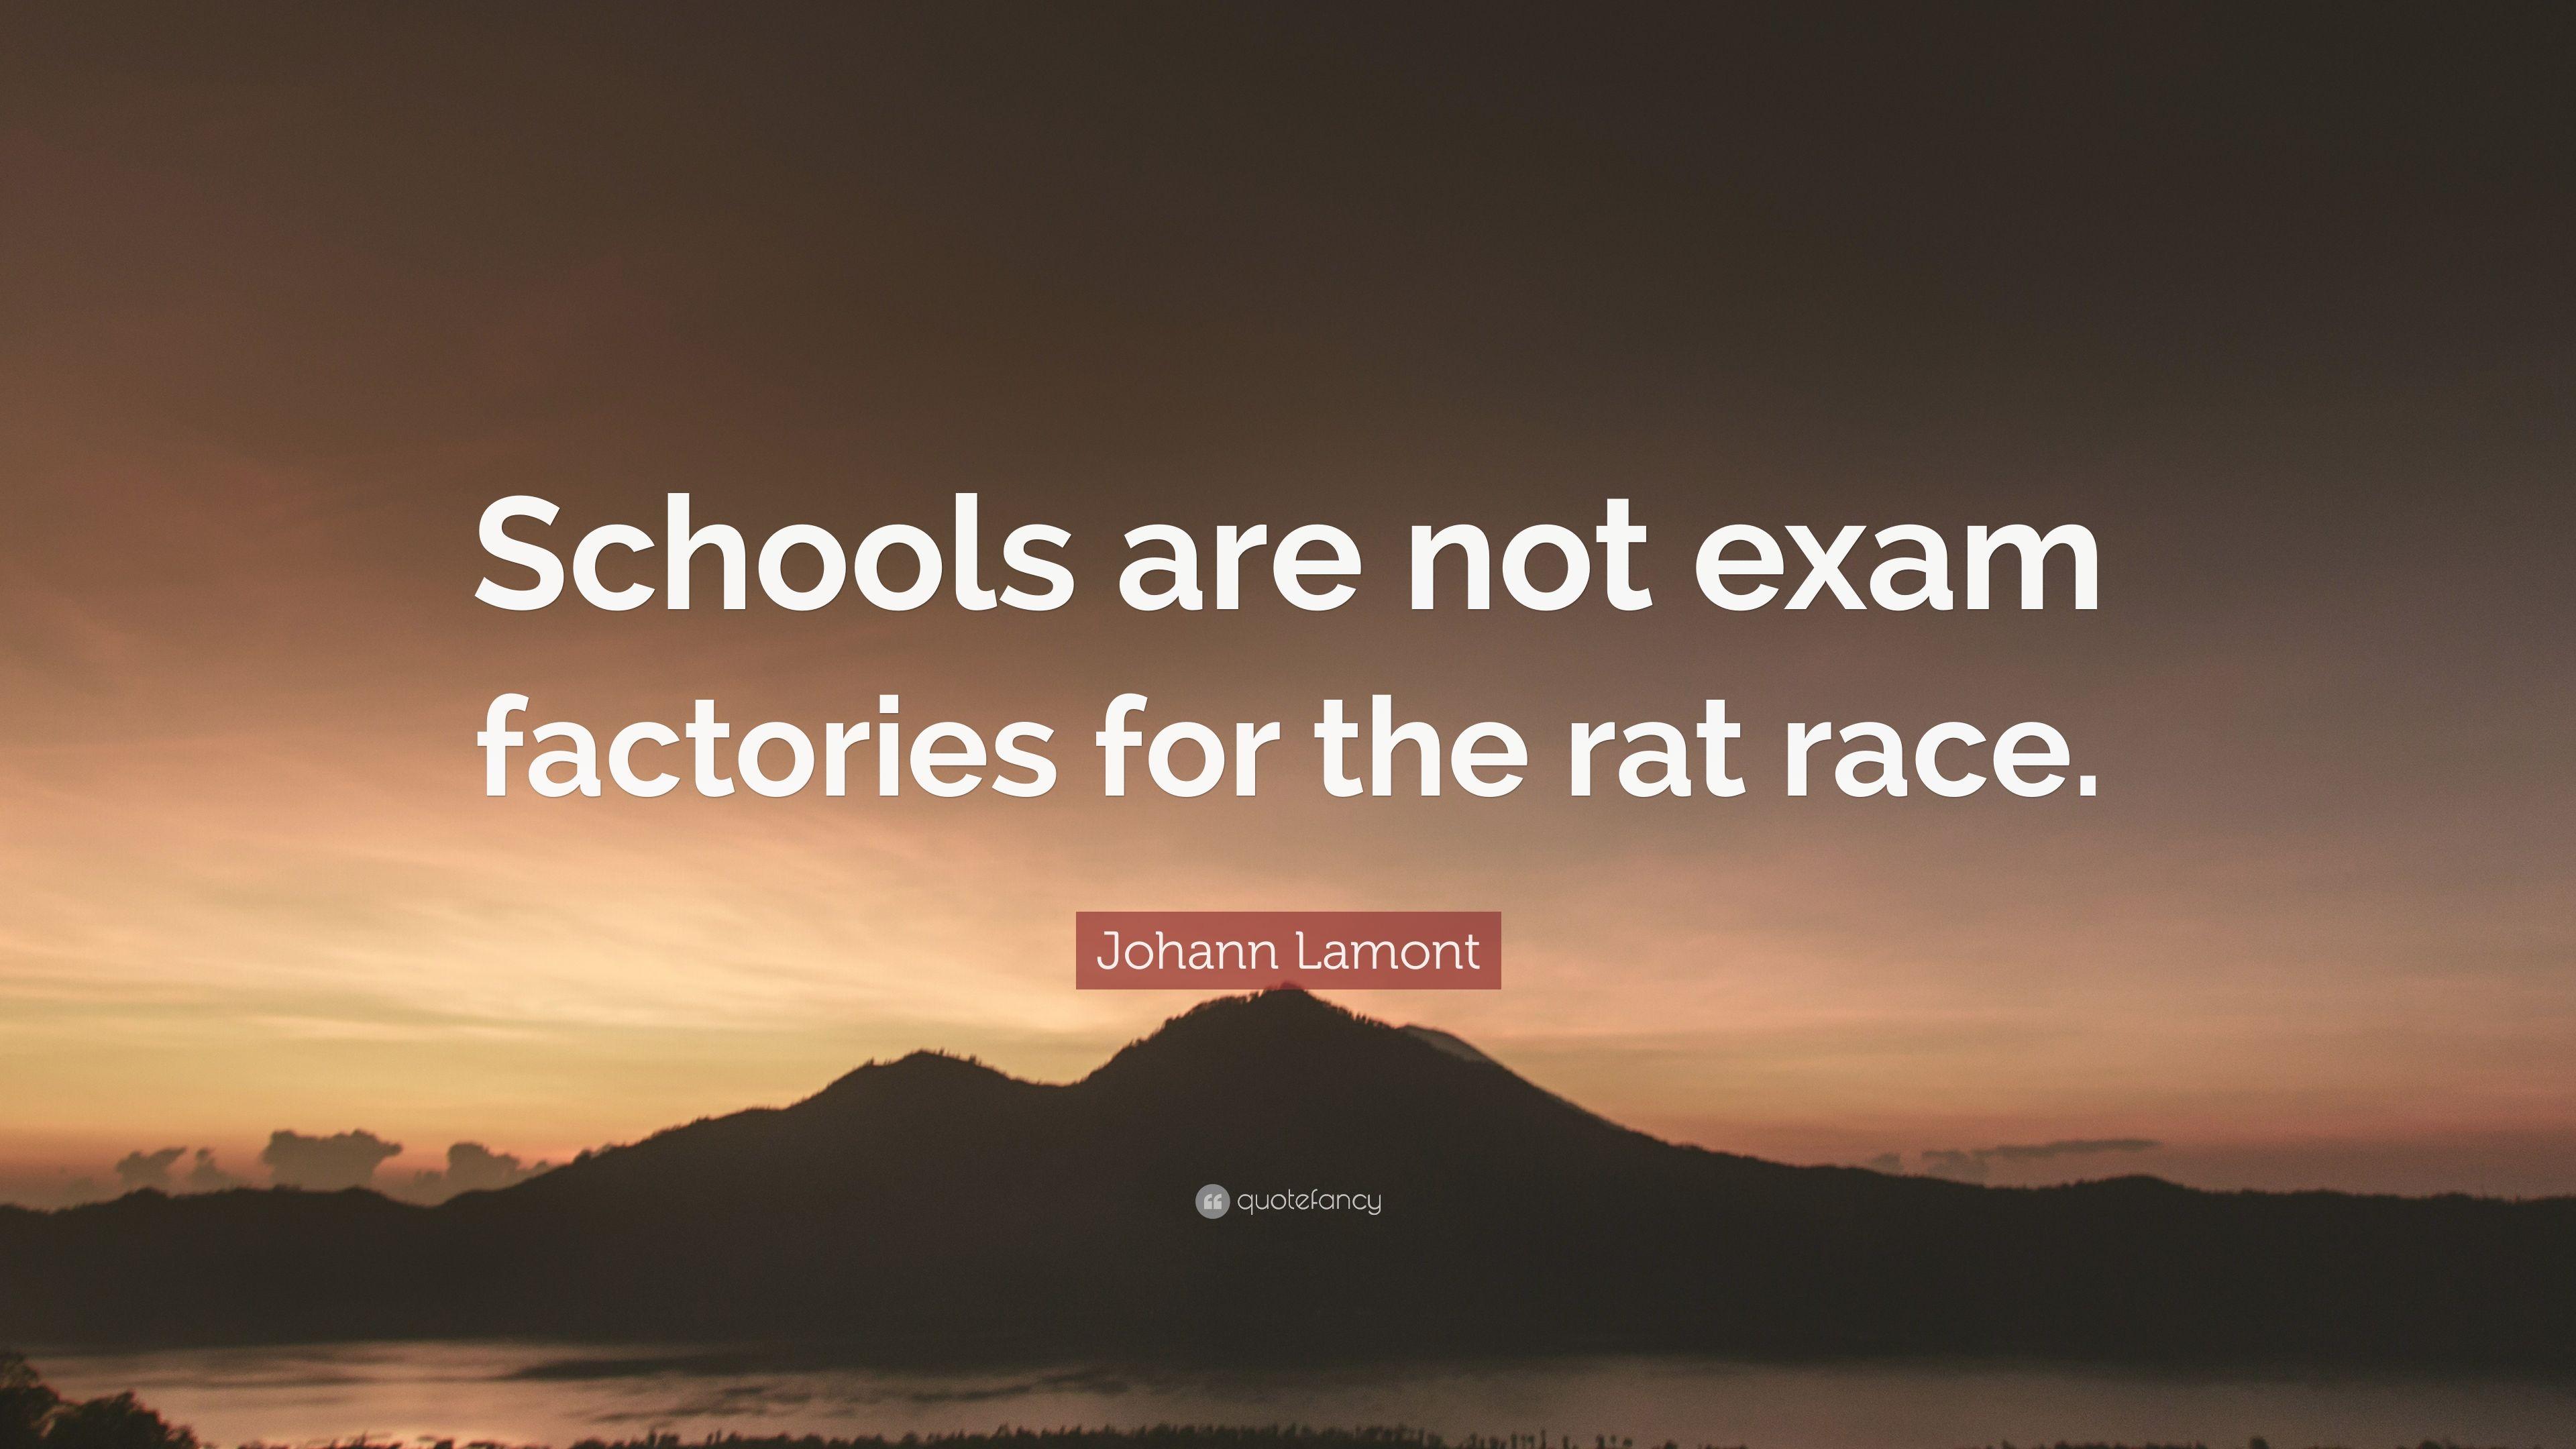 Johann Lamont Quote: “Schools are not exam factories for the rat